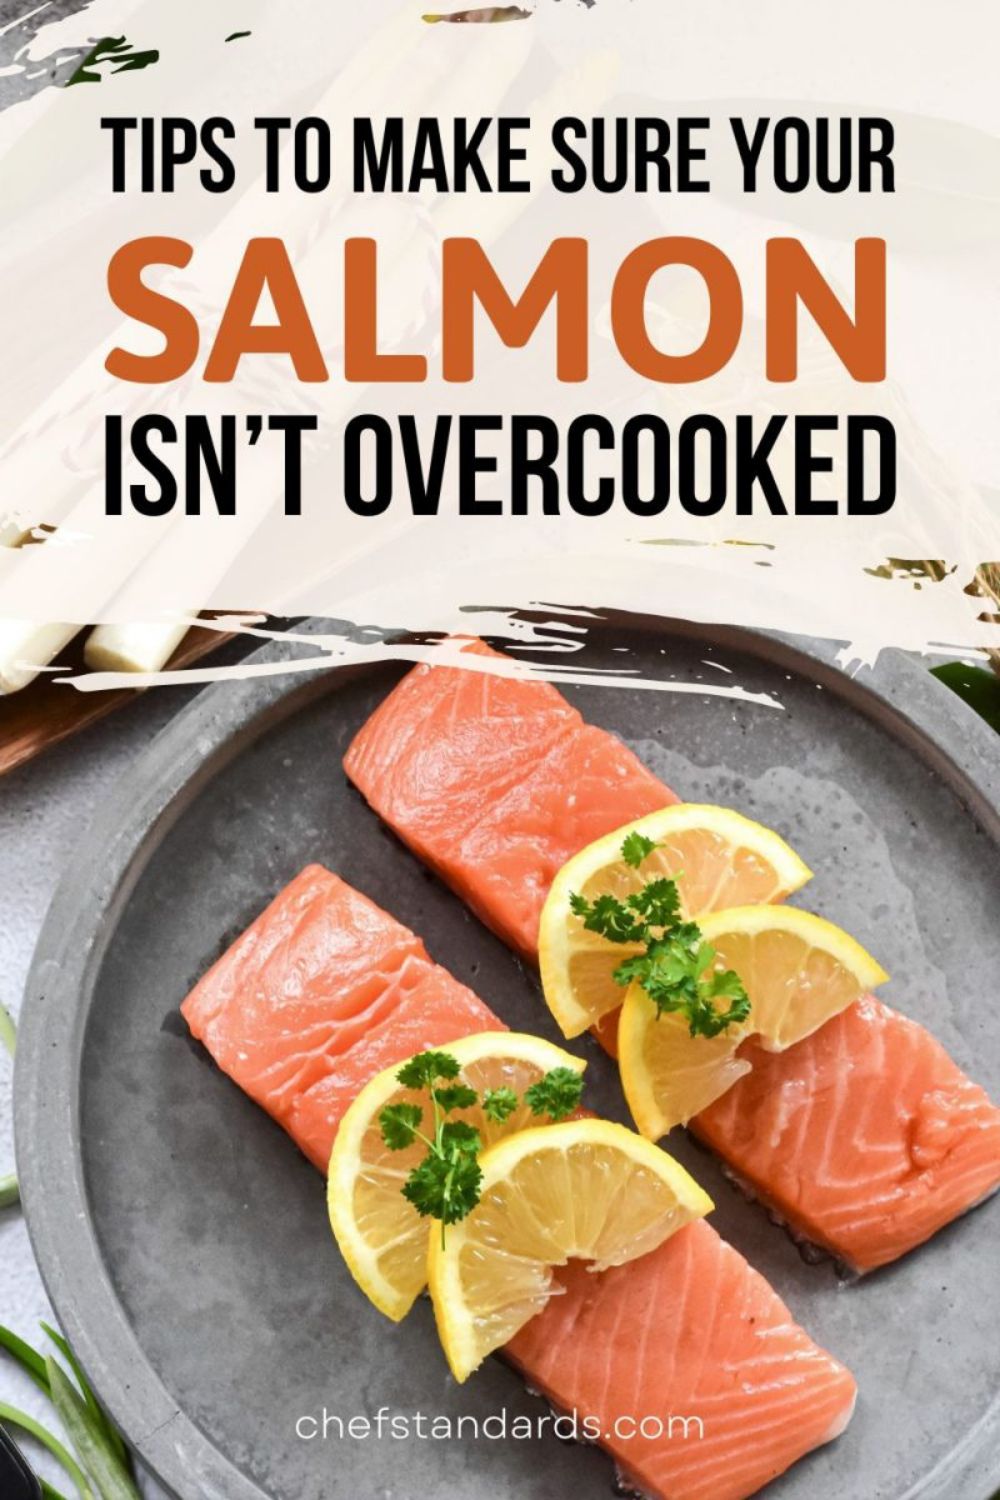 5 Sure Signs You Are Dealing With Undercooked Salmon